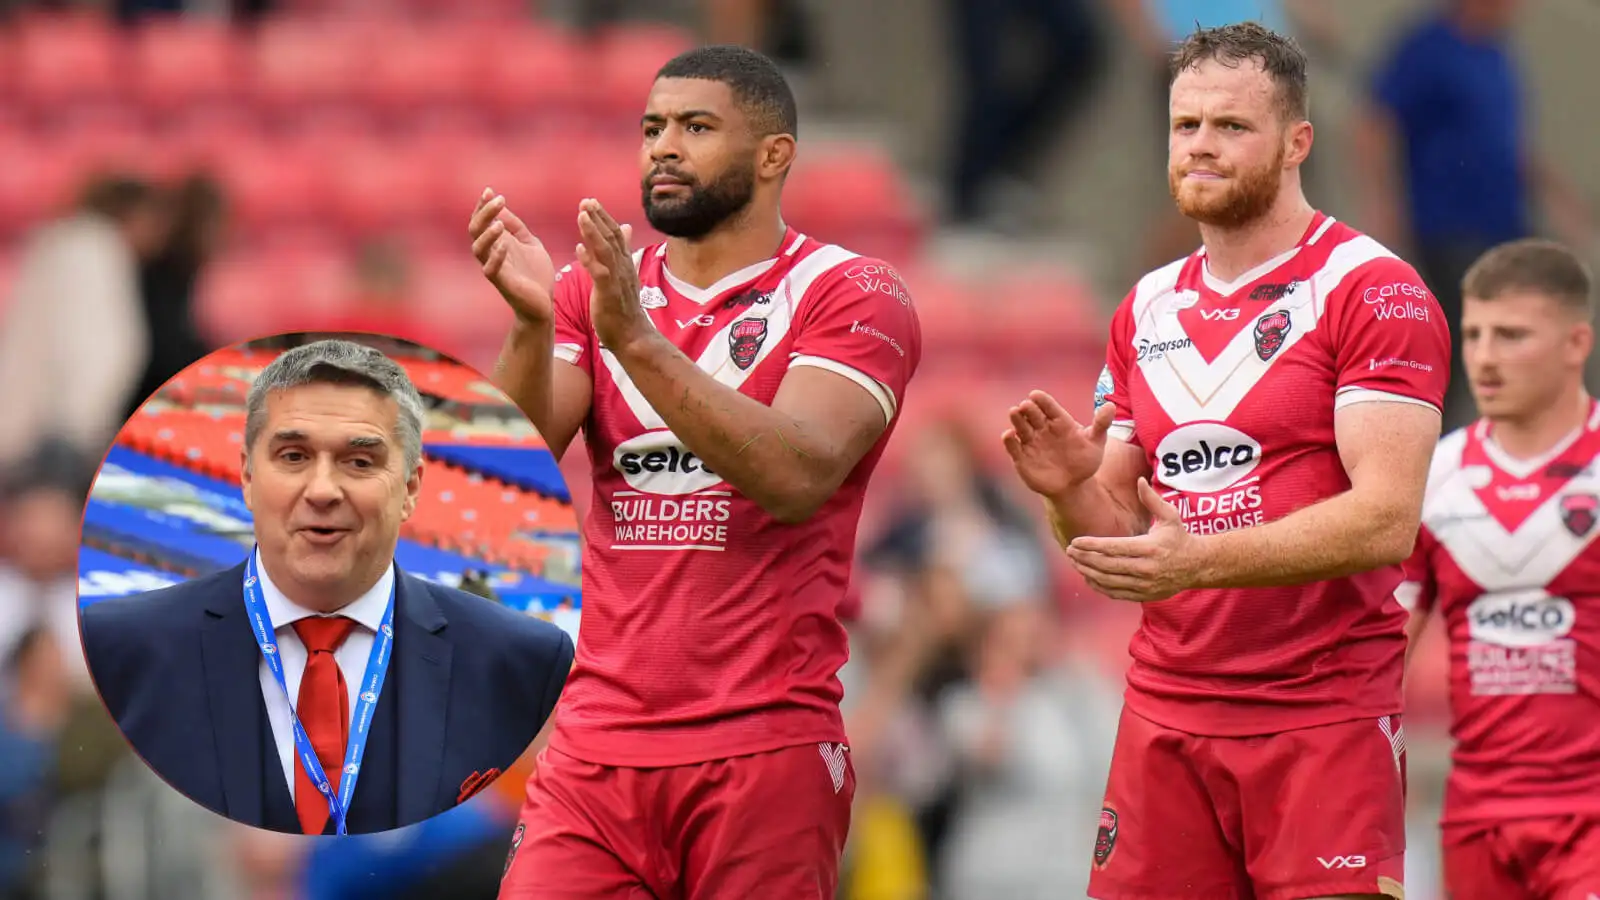 Let the stars play: Salford Red Devils MD believes Match Review Panel process is ‘ruining the game’ and labels system ‘insane’